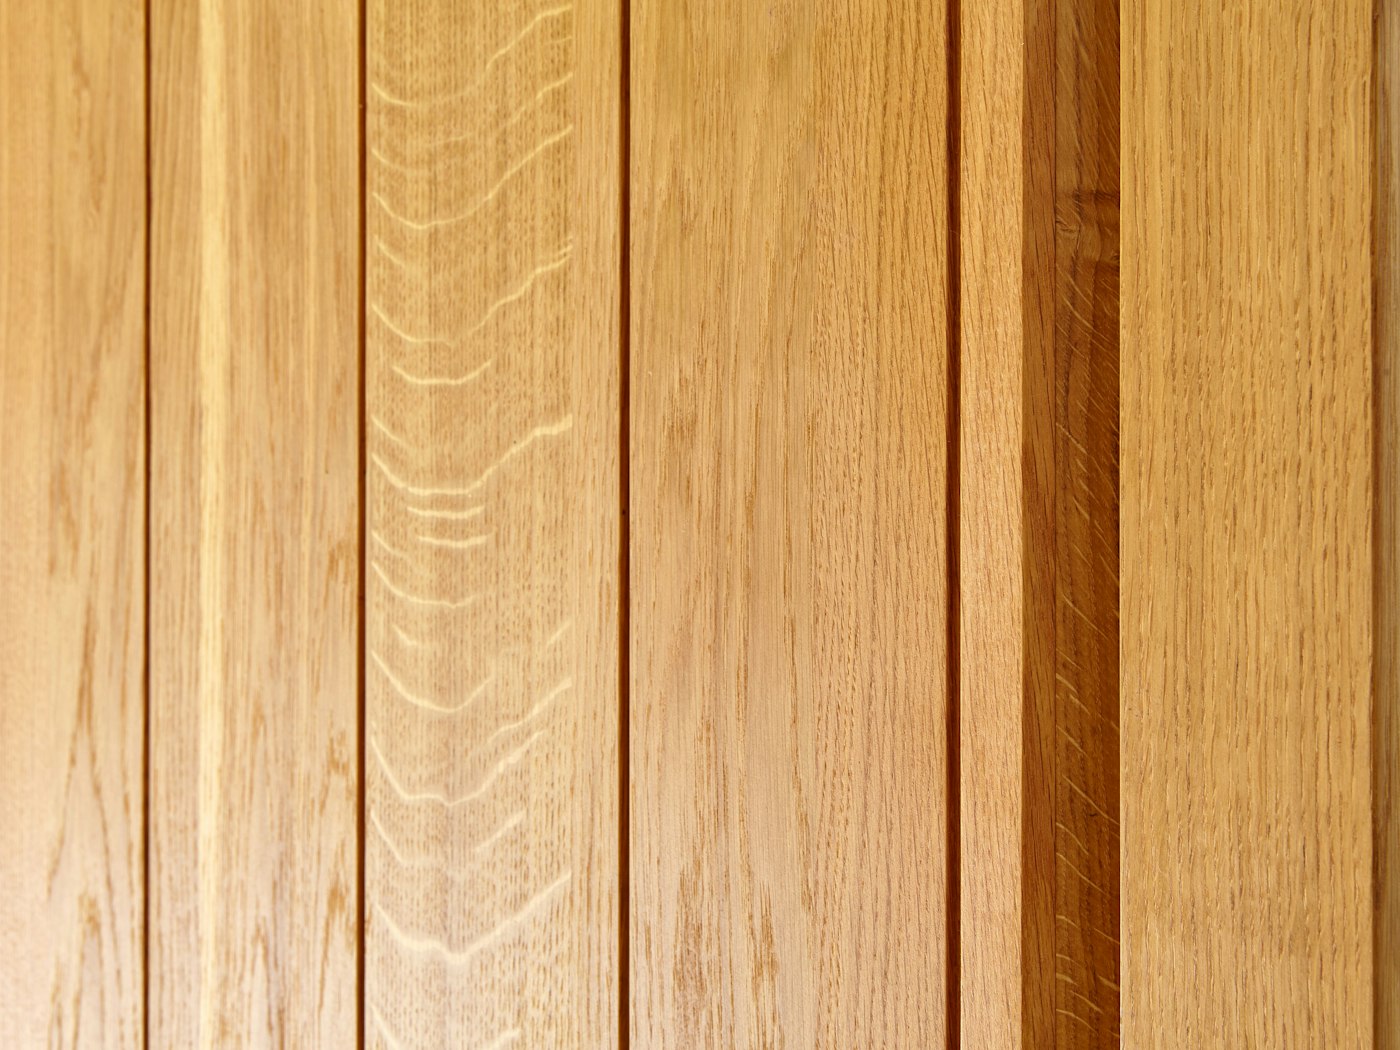 The Porto front door is made from beautiful european oak